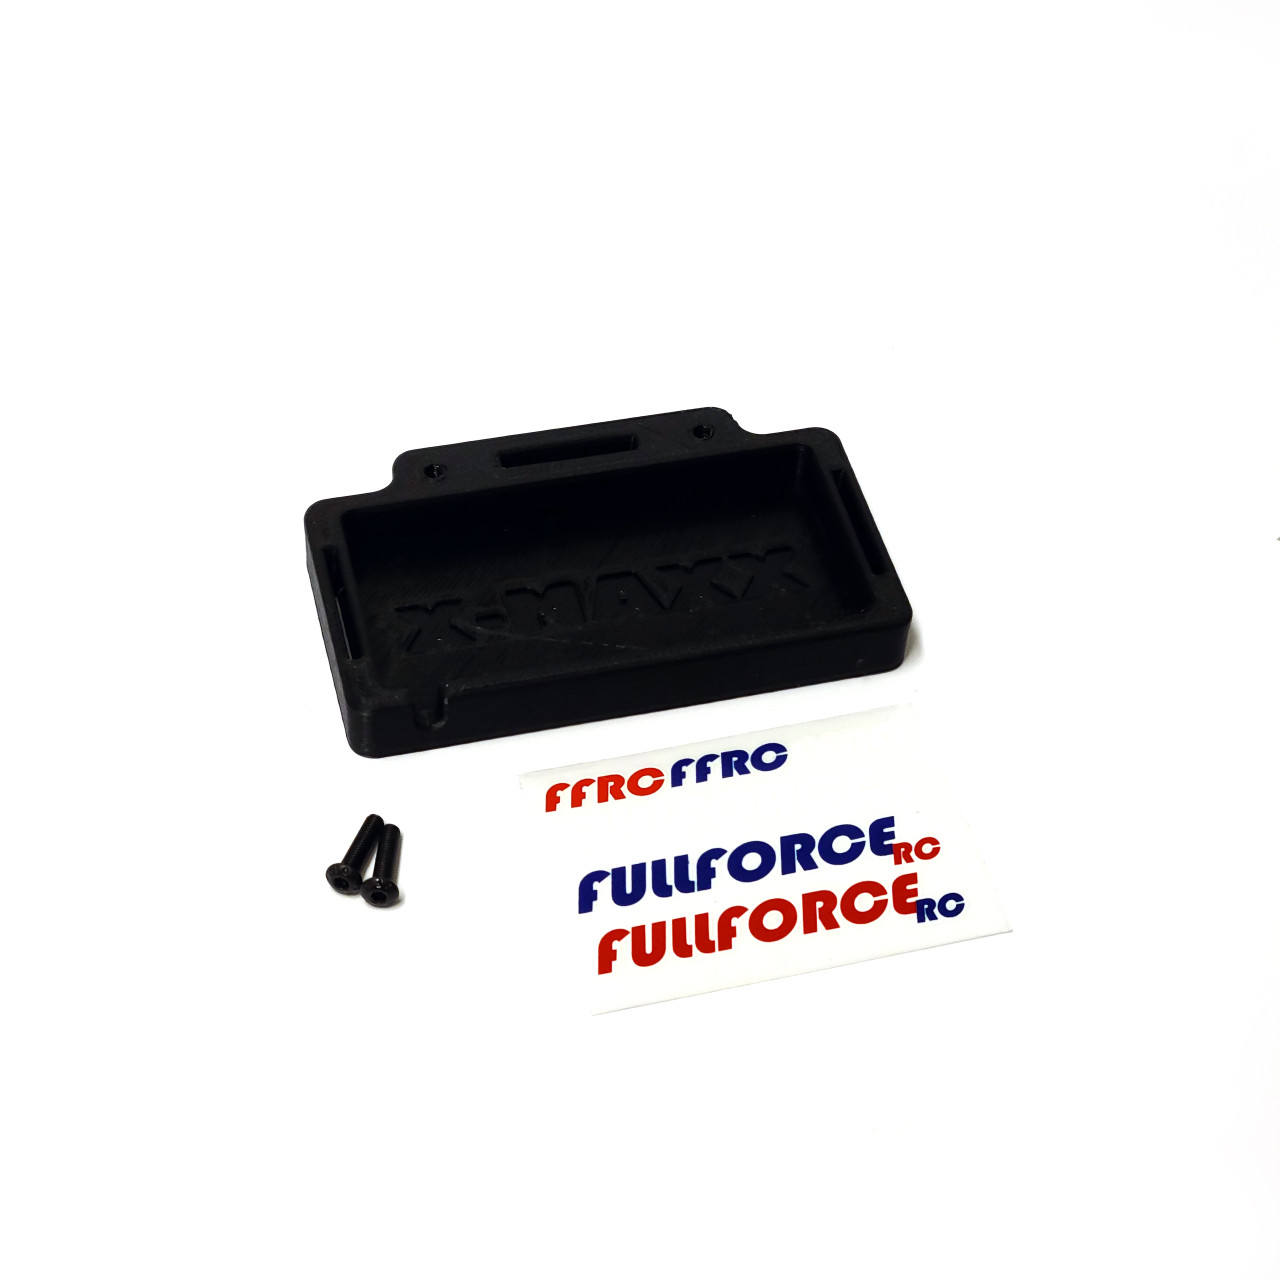 FOR Traxxas X-MAXX Accessory Battery Tray in BLACK ABS.